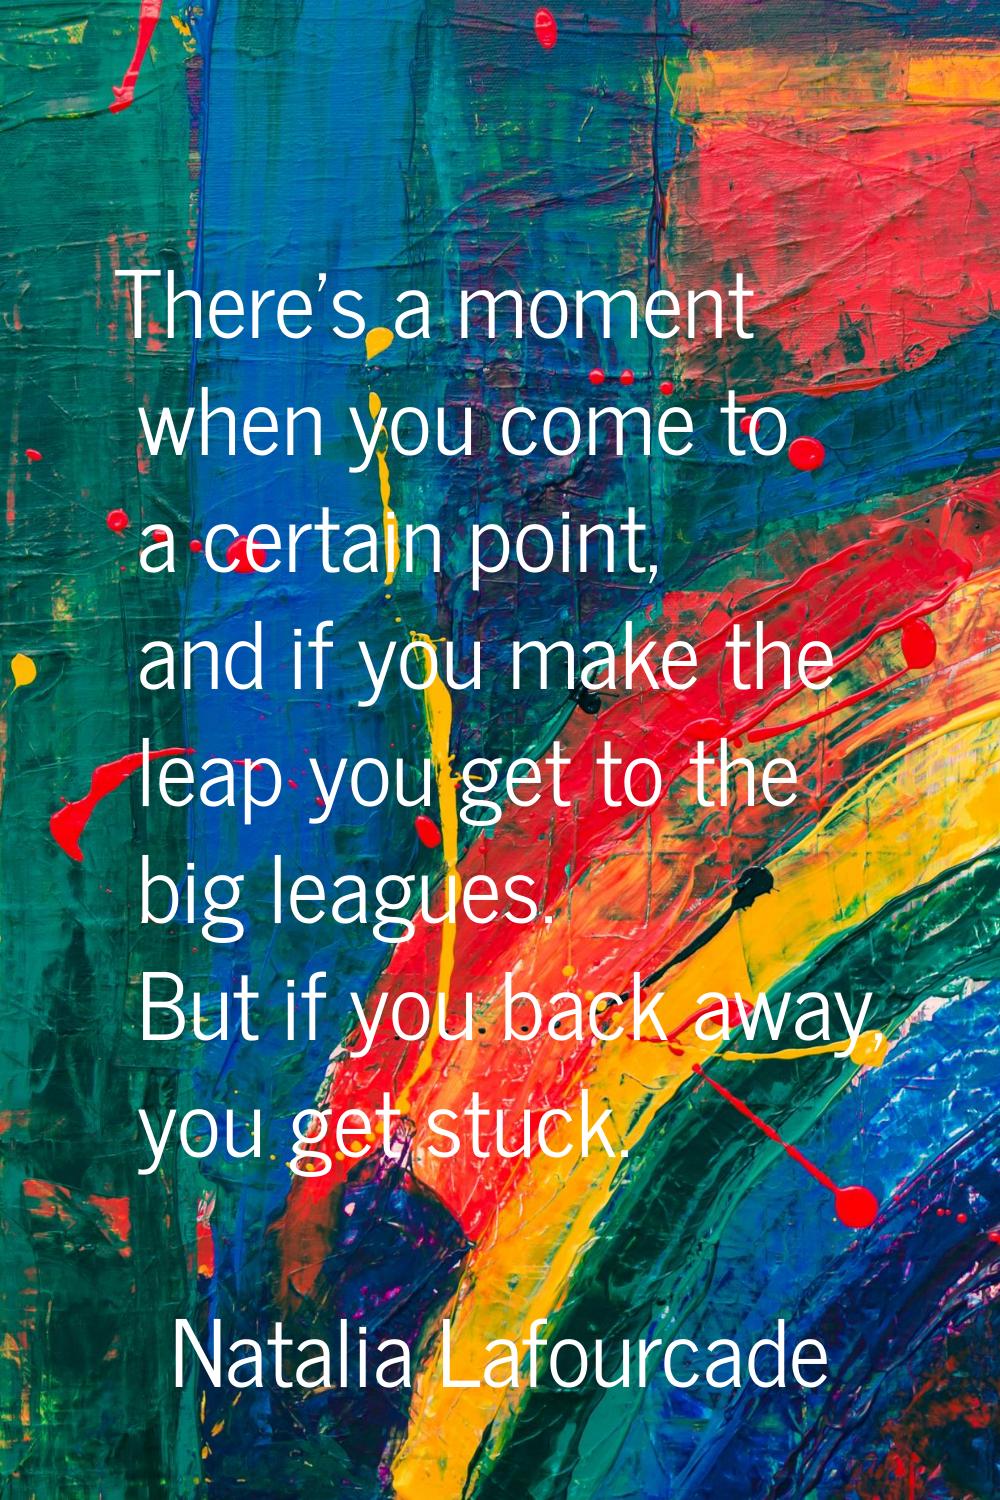 There's a moment when you come to a certain point, and if you make the leap you get to the big leag